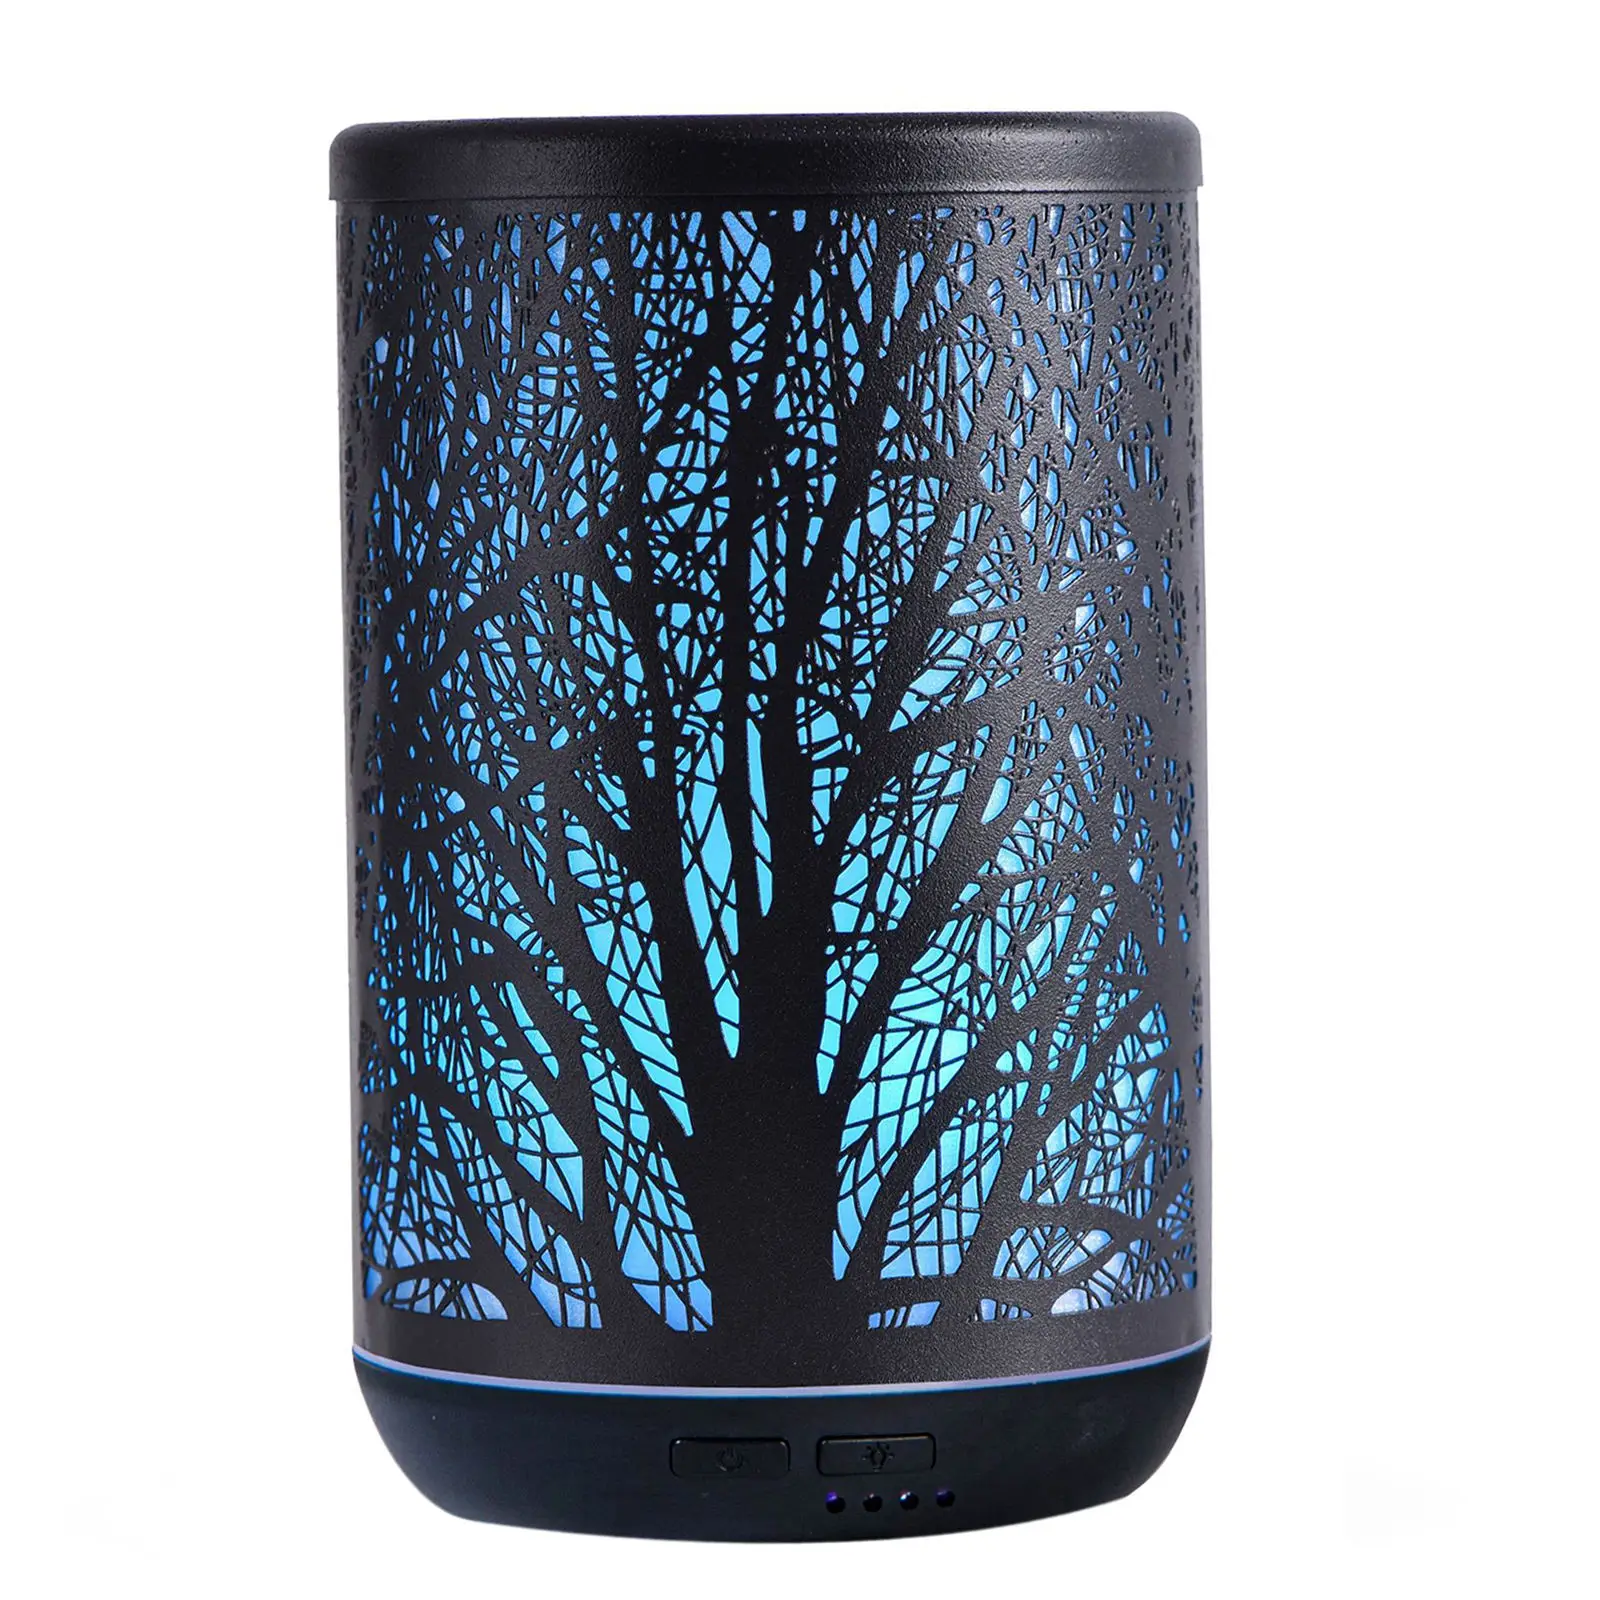 

Ultrasonic Forest Air Humidifier 300ML Aroma Essential Oil Diffuser Home Car USB Fogger Mist Maker with Night Lamp